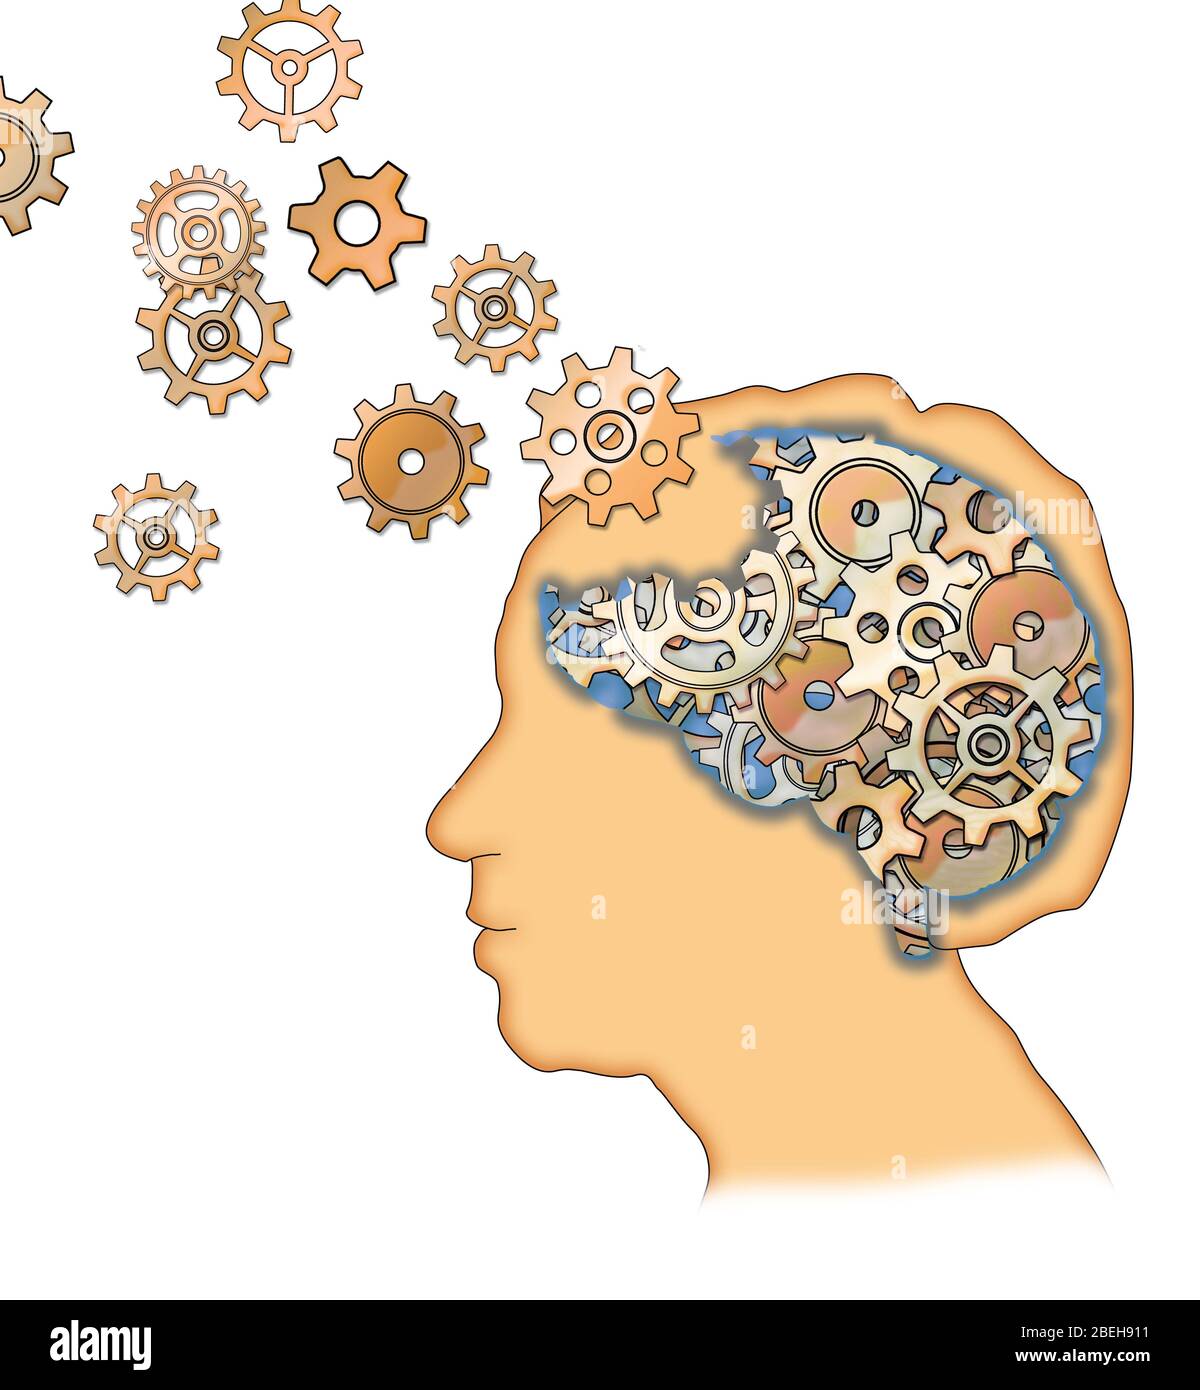 A conceptual illustration of memory loss, showing a head with the cogs of its brain floating away. Stock Photo